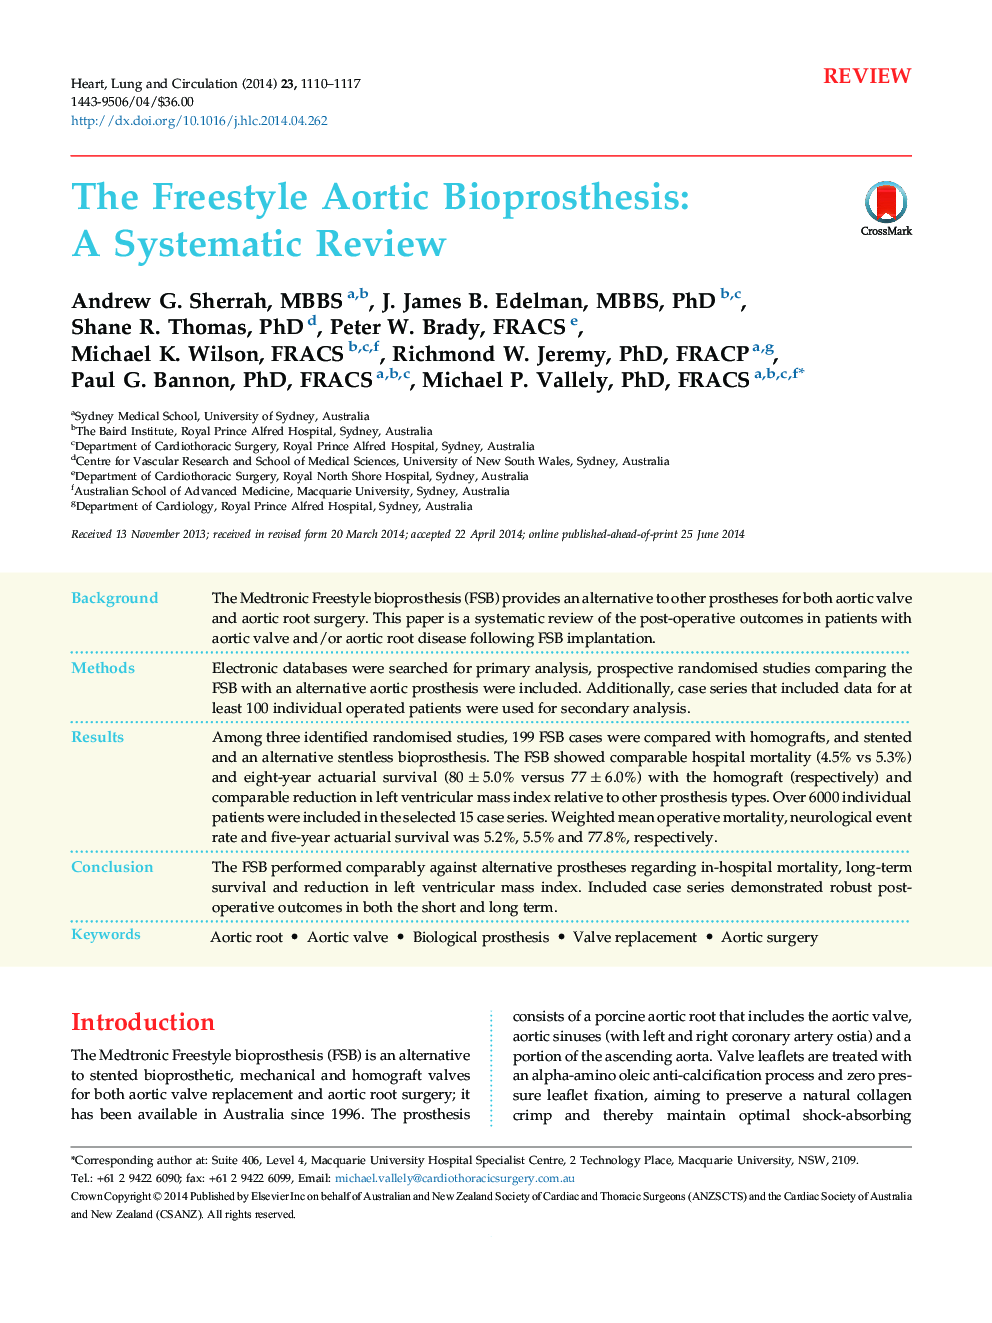 The Freestyle Aortic Bioprosthesis: A Systematic Review